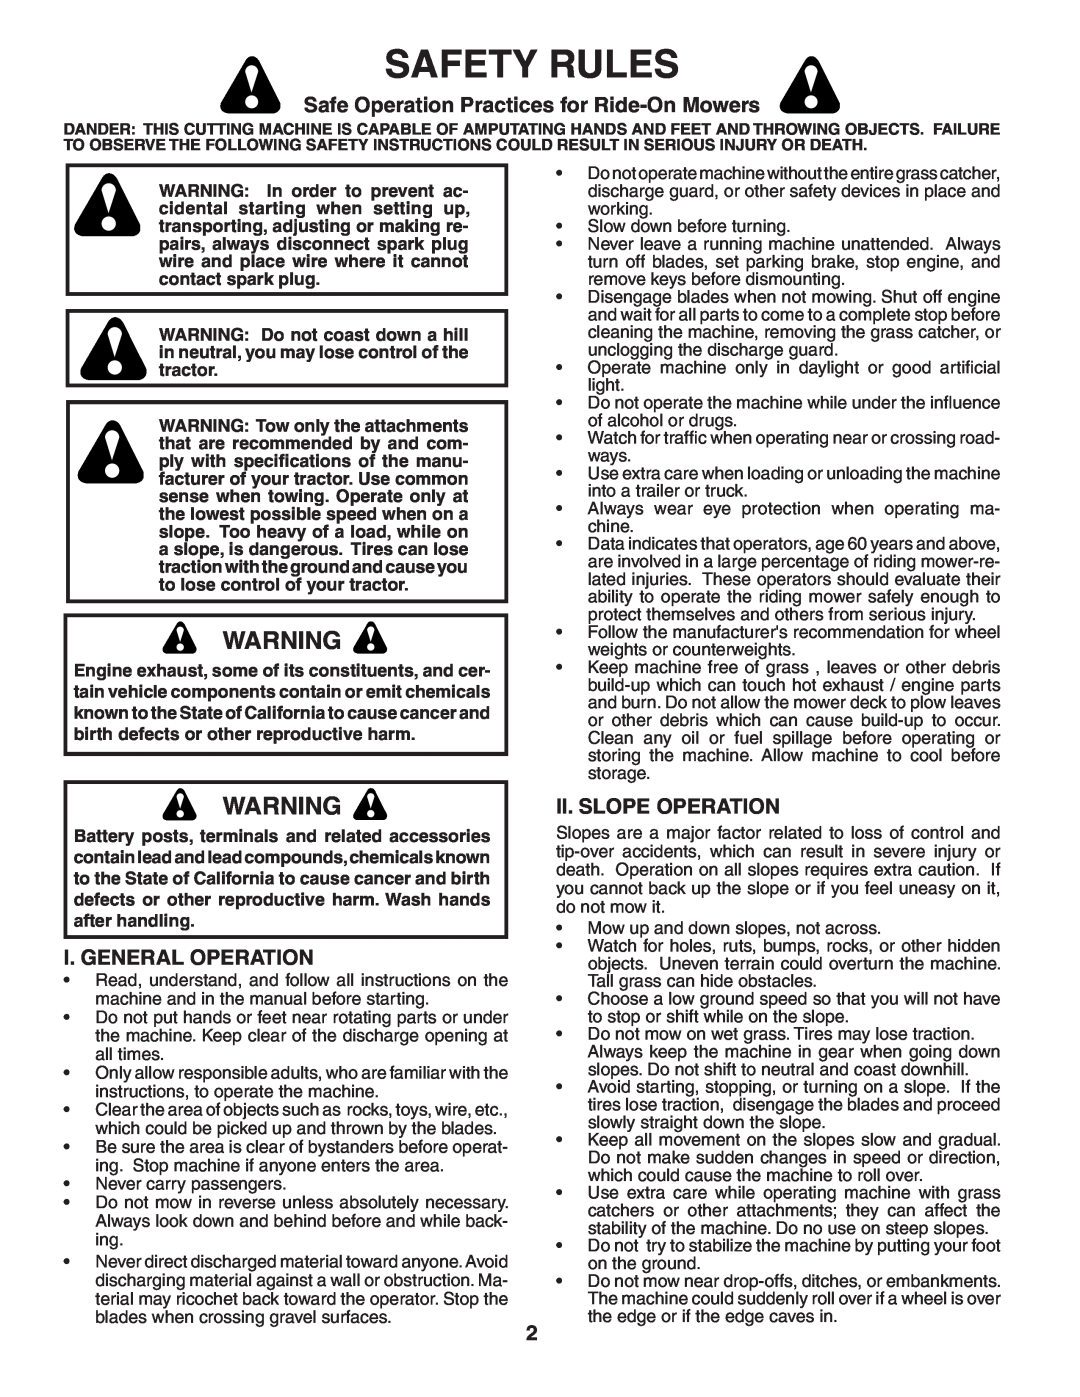 Poulan 96042001000 Safety Rules, Safe Operation Practices for Ride-OnMowers, I. General Operation, Ii. Slope Operation 